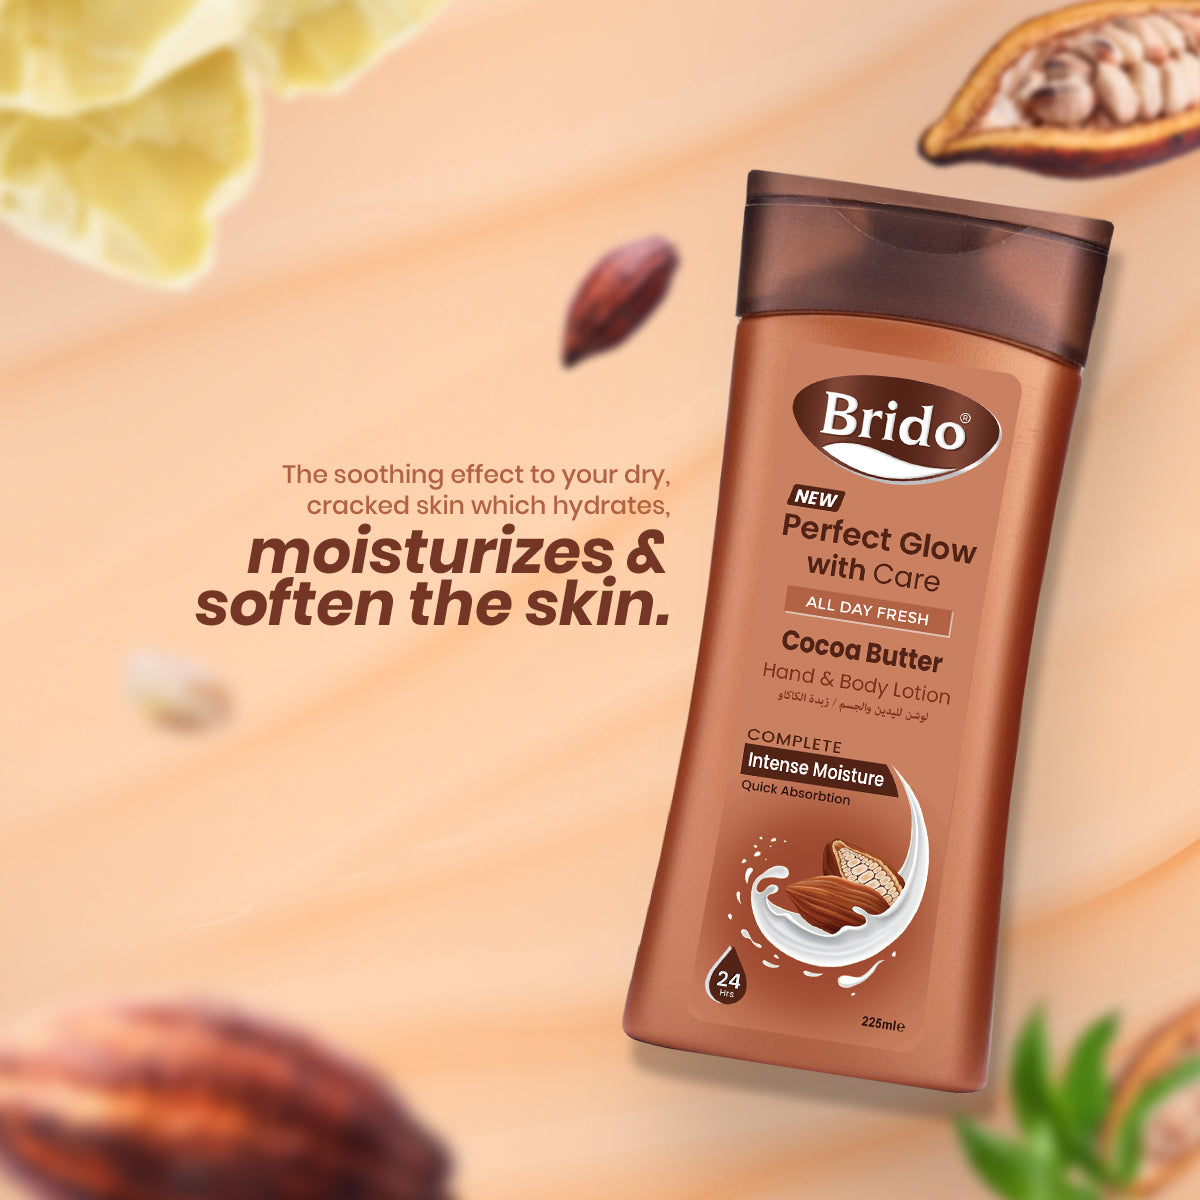 Brido Cocoa Butter Body Lotion (Skin Glow with Care) •	Heals hydrate chapped skin. •	Moisturizes the skin & gives a perfect glow. •	It reduces stretch marks and scars. •	It heals sensitive skin Cocoa butter is high in antioxidants, which help fight off free-radical damage. •	Made with natural cocoa butter. •	Non-greasy formula Gives perfect glow as well as softness. •	Locks the moisture in the skin.